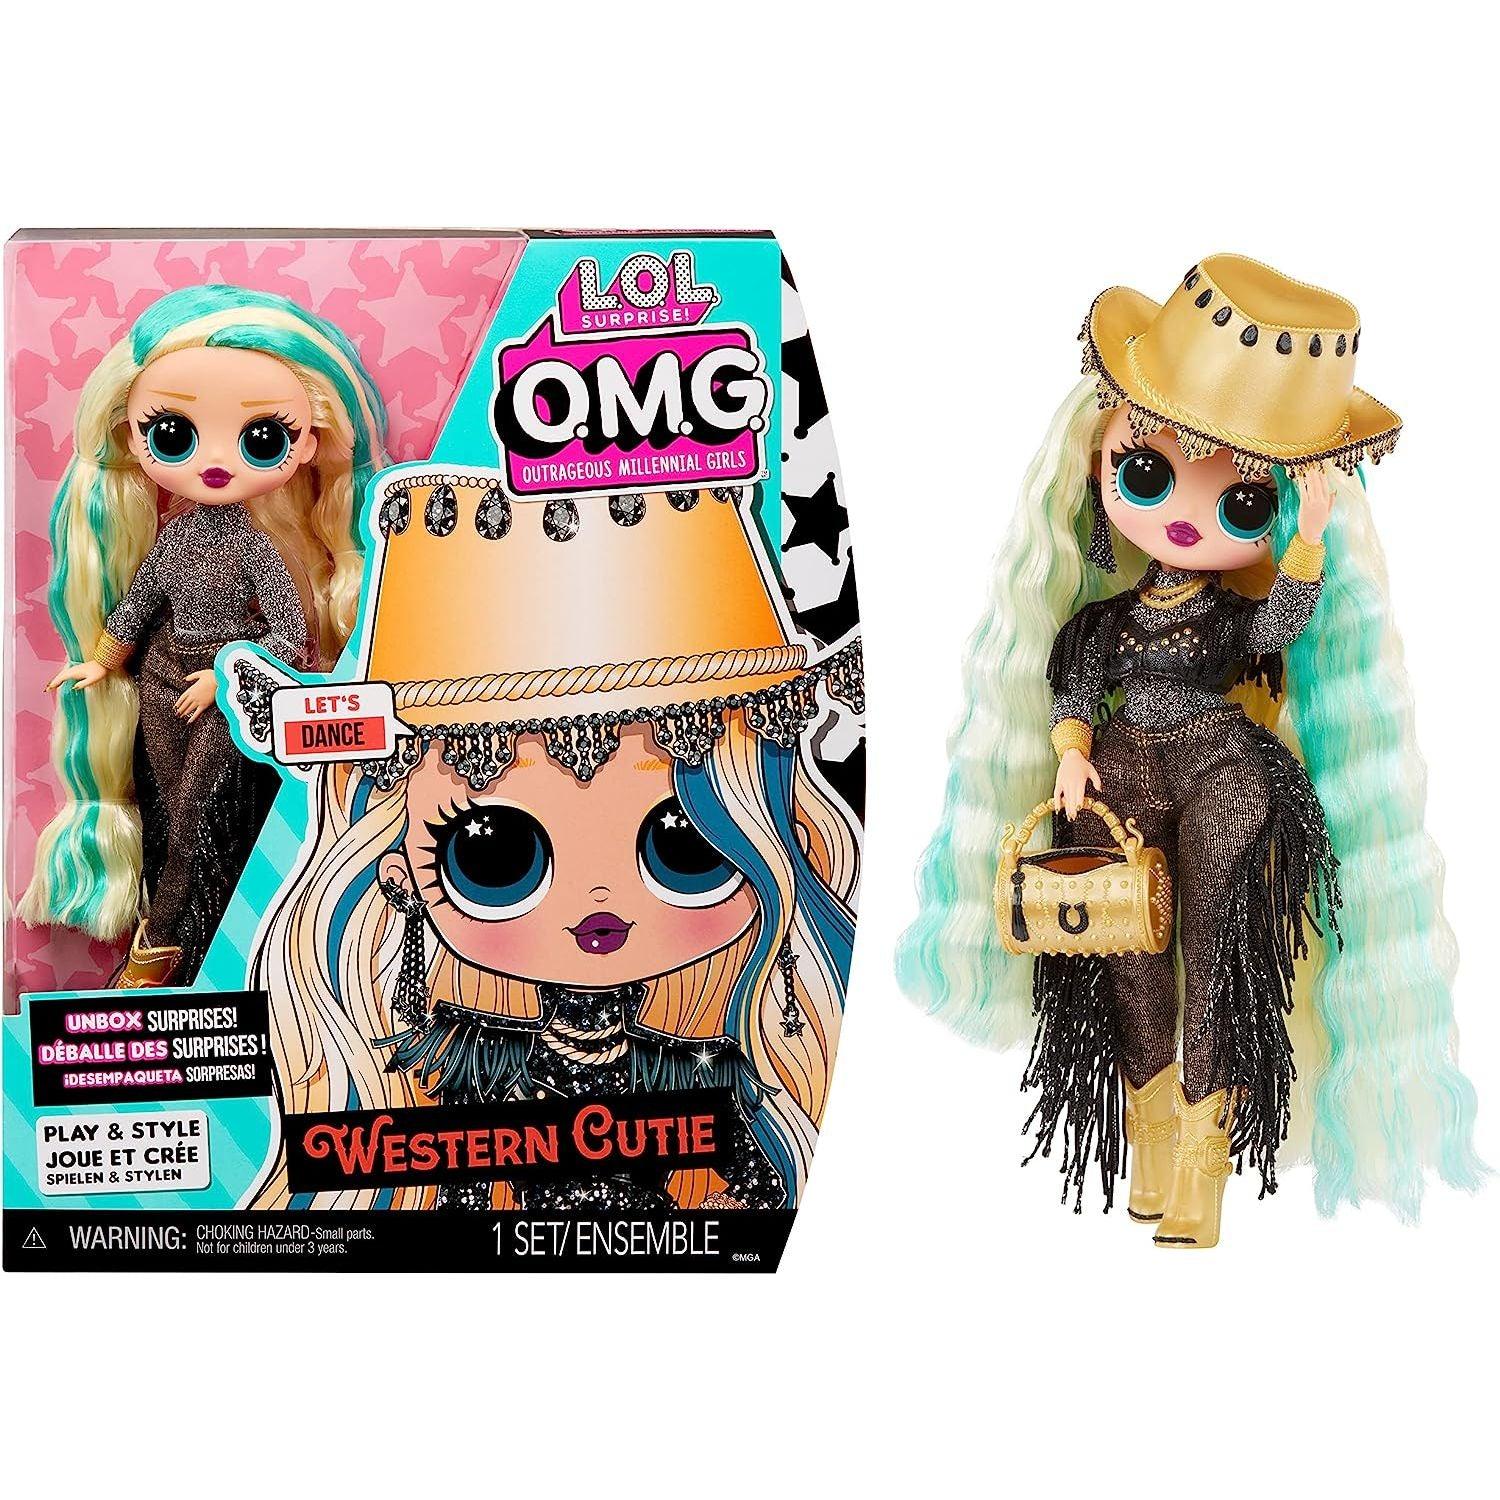 L.O.L. Surprise! O.M.G. Western Cutie Fashion Doll with Multiple Surprises and Fabulous Accessories